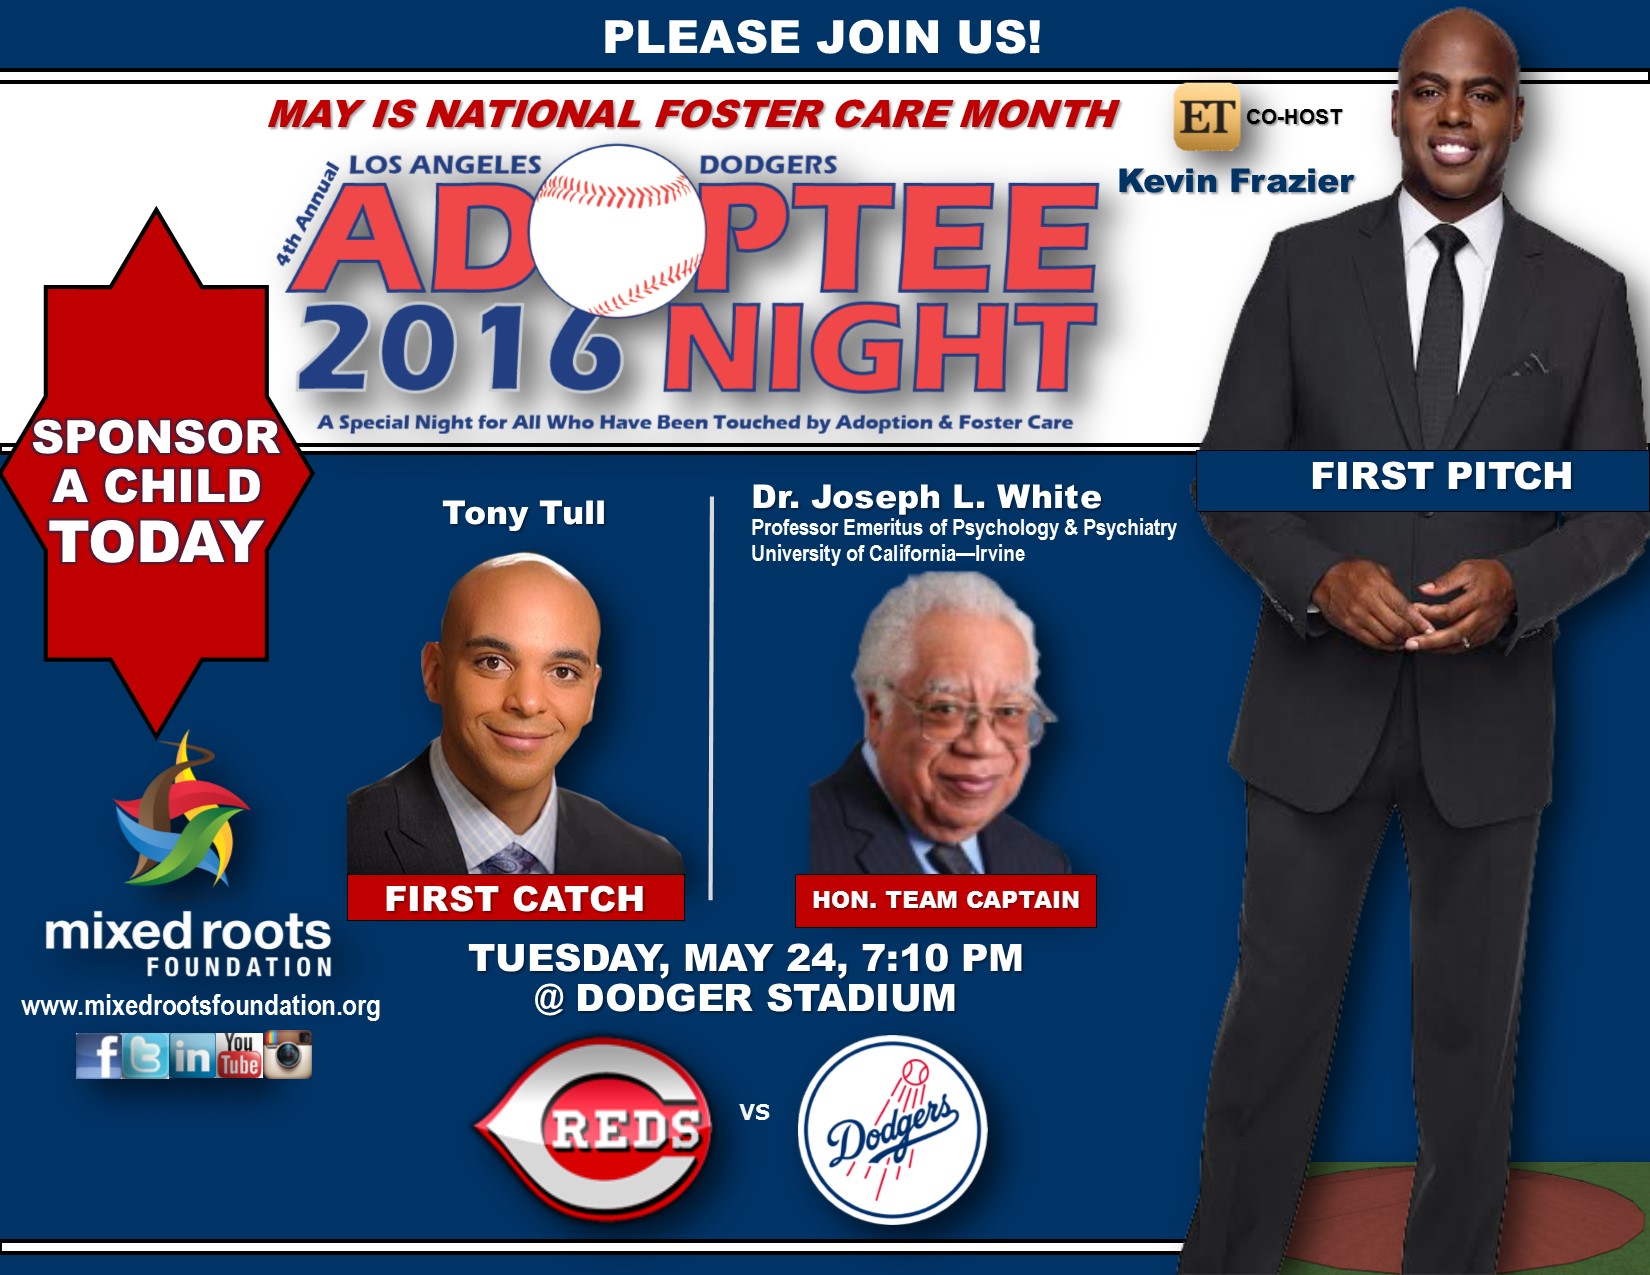 Mixed Roots Foundation 4th Annual LA Dodgers Adoptee Night with Kevin Frazier of Entertainment Tonight